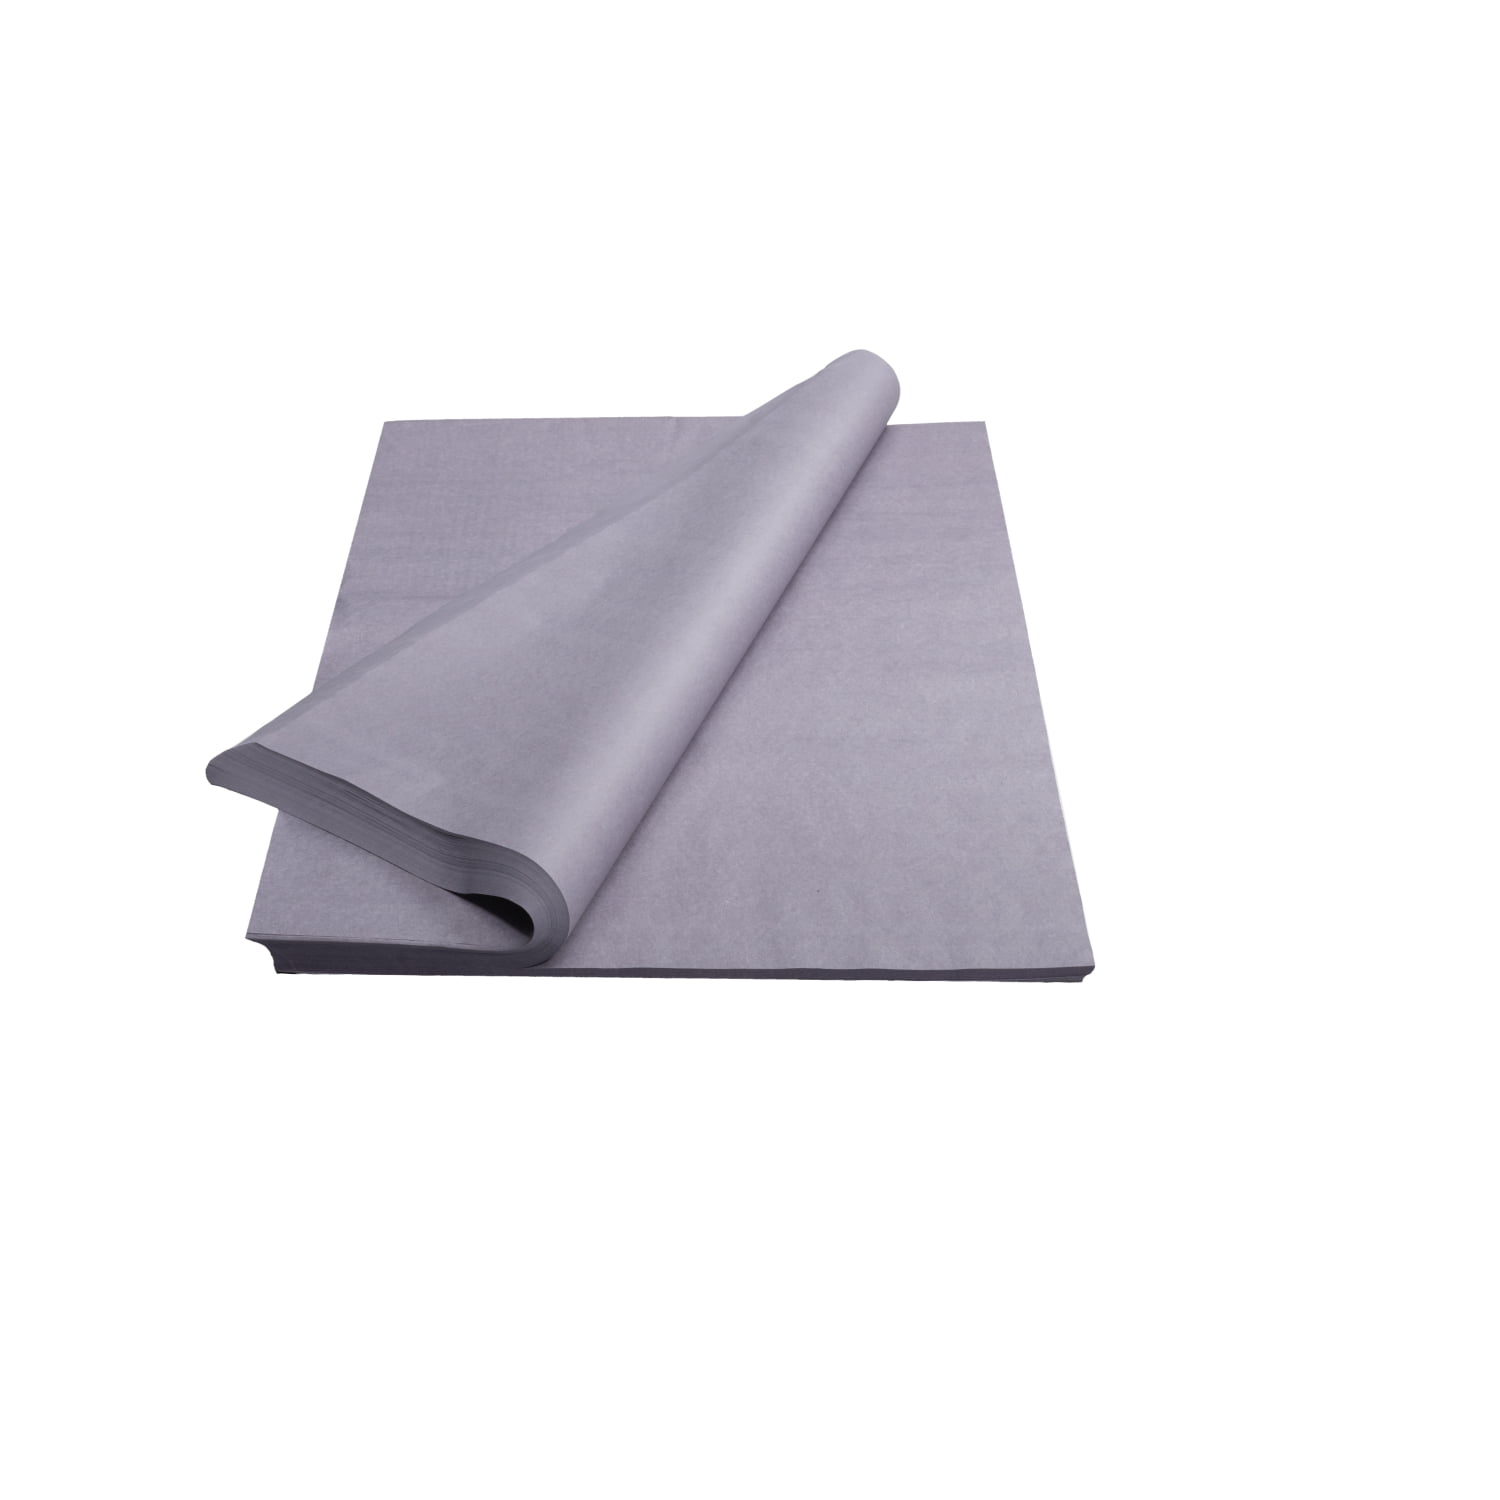 18GSM Sheets GREY Tissue Wrapping Paper 35 x 45cm SILVER 